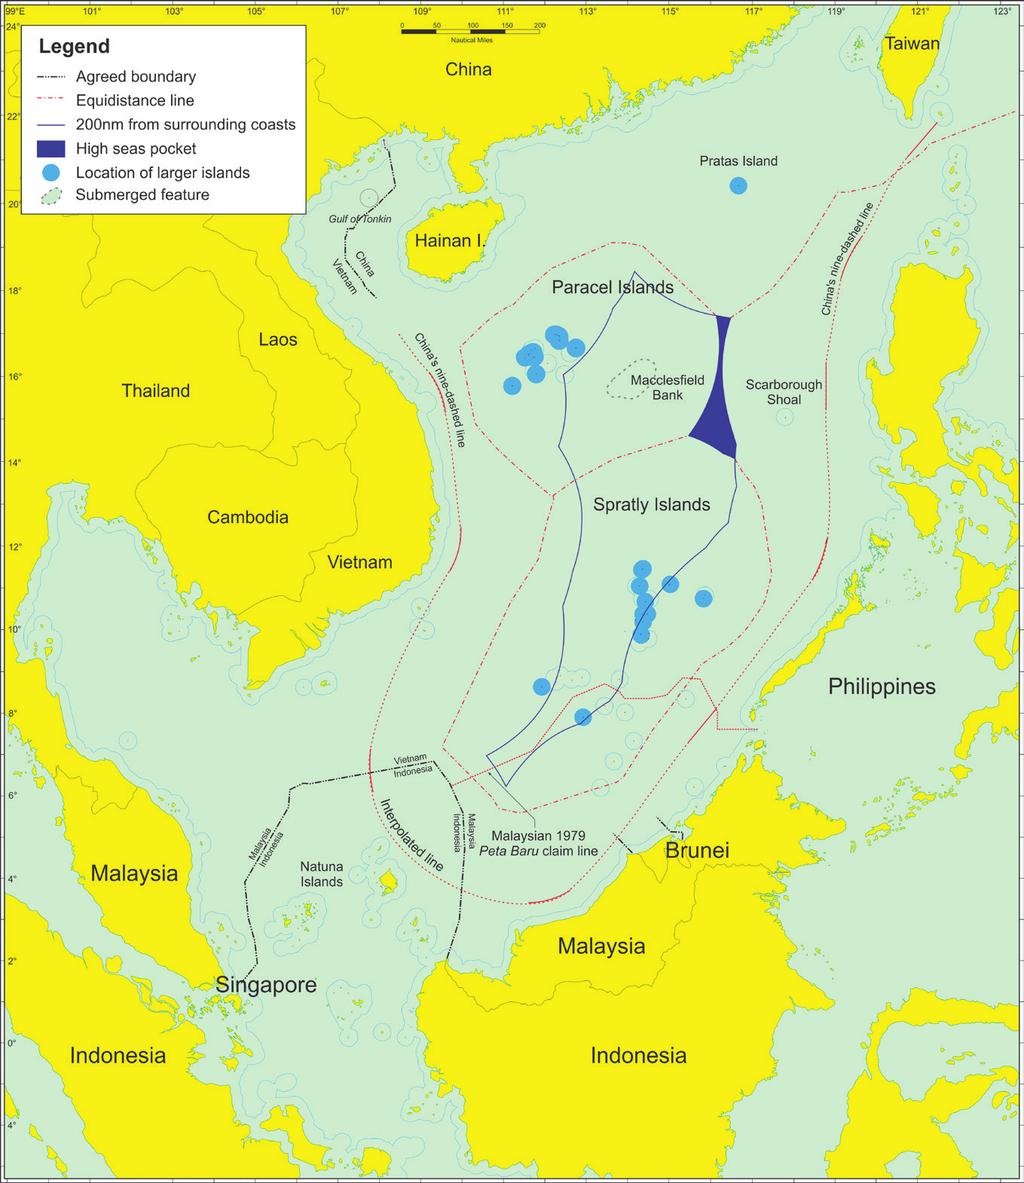 defining eez claims from islands 237 figure 8 Existing maritime claims and EEZ claim from largest islands (with equidistance lines) and 12-nm territorial sea arcs from rocks necessary to set aside